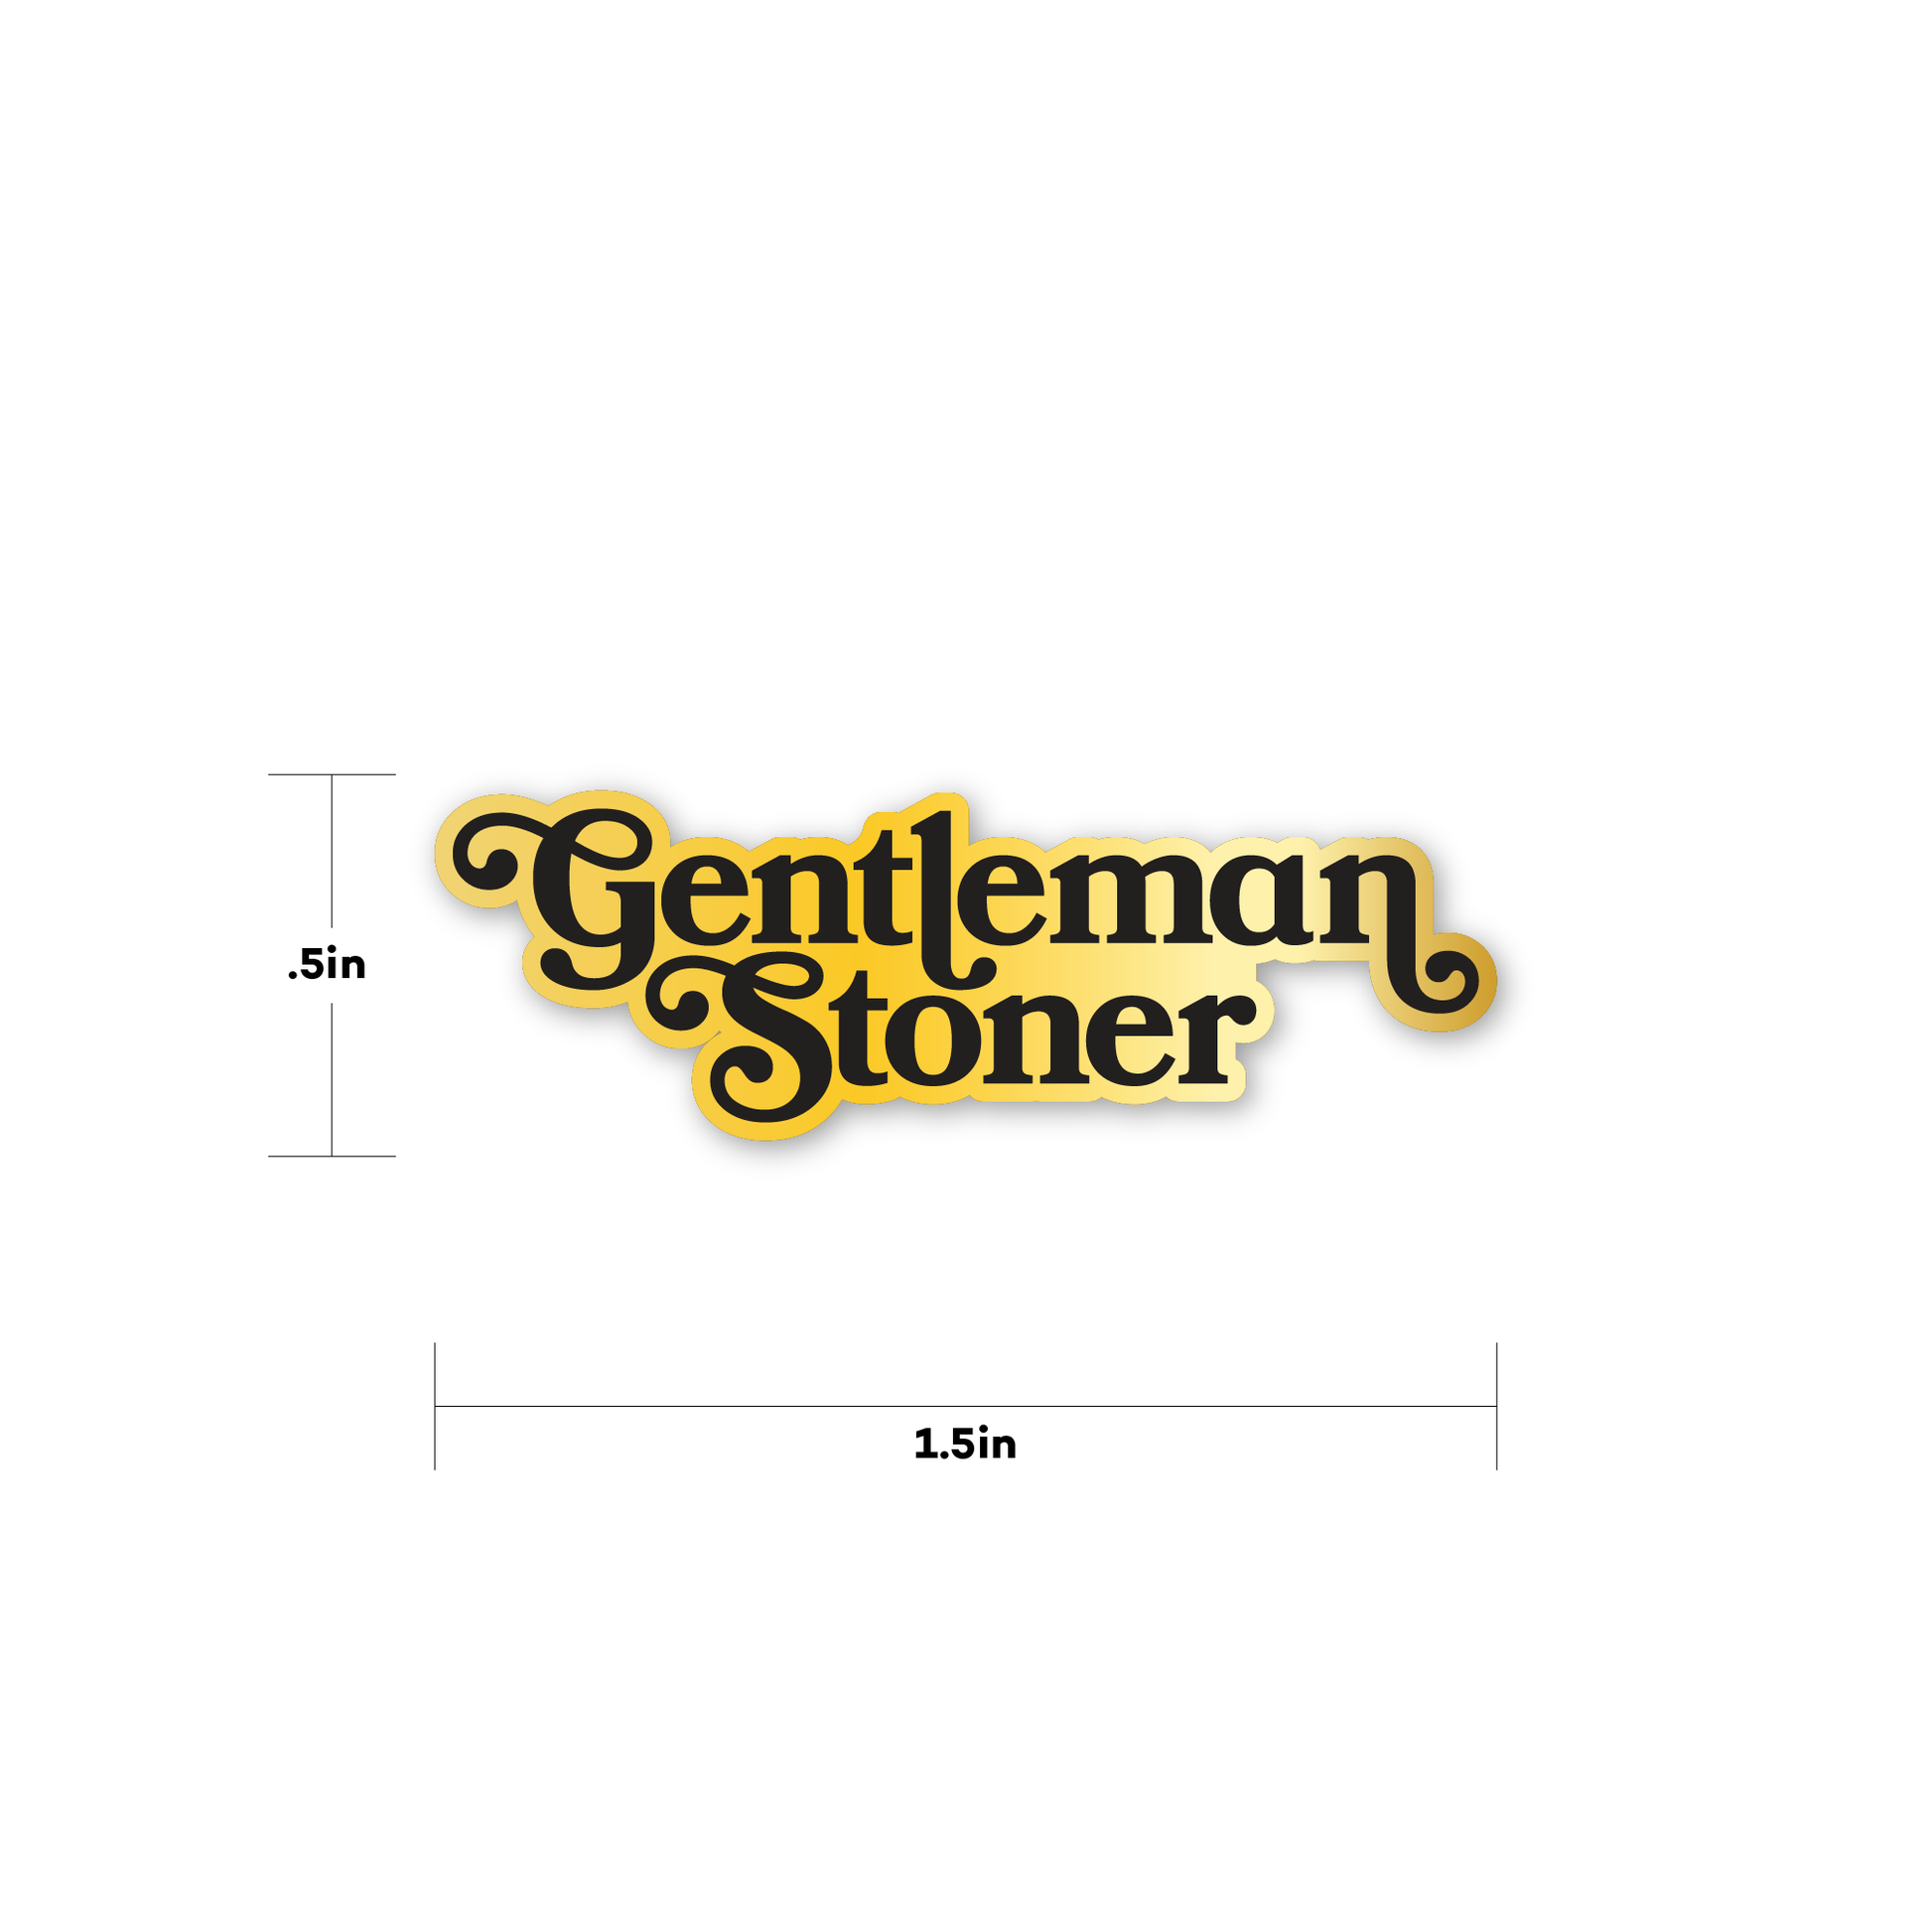 .5 in by 1.5 in gold gentleman stoner enamel pin by fntsma